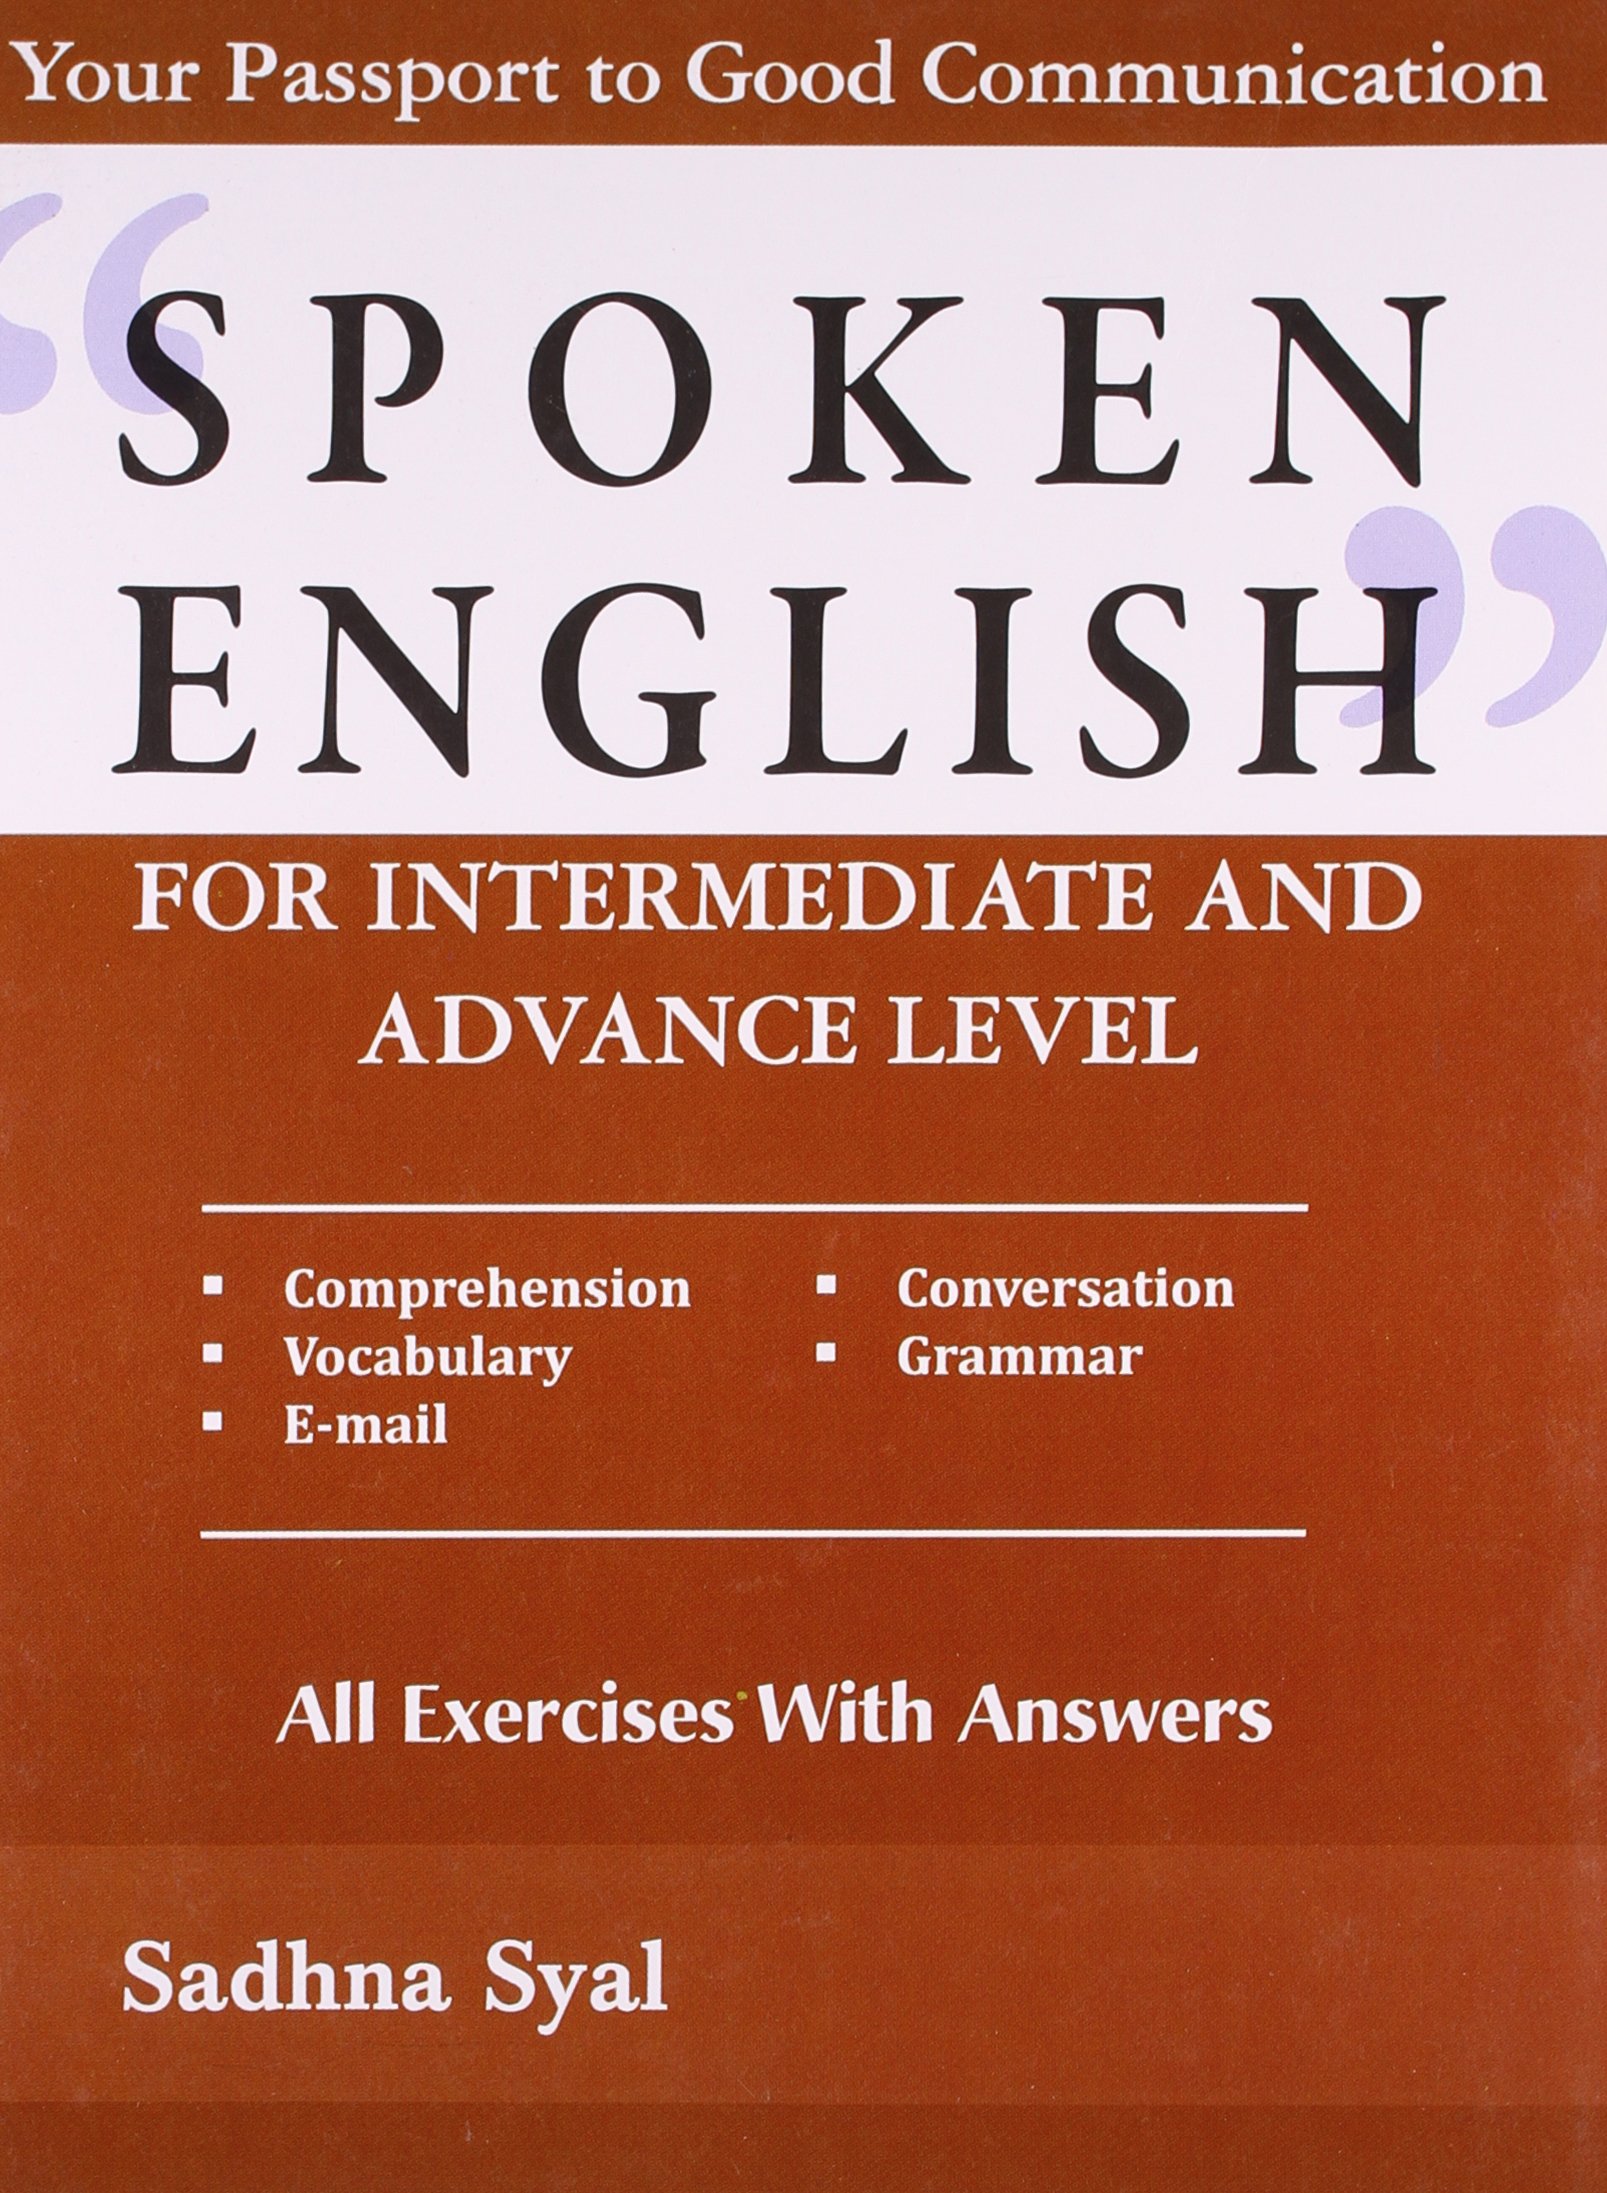 SPOKEN ENGLISH FOR INTERMEDIATE AND ADVANCE LEVEL : Your Passport to Good Communication - Comprehension, Conversation, Vocabulary, Grammar, E-mail. All exercises with answers.